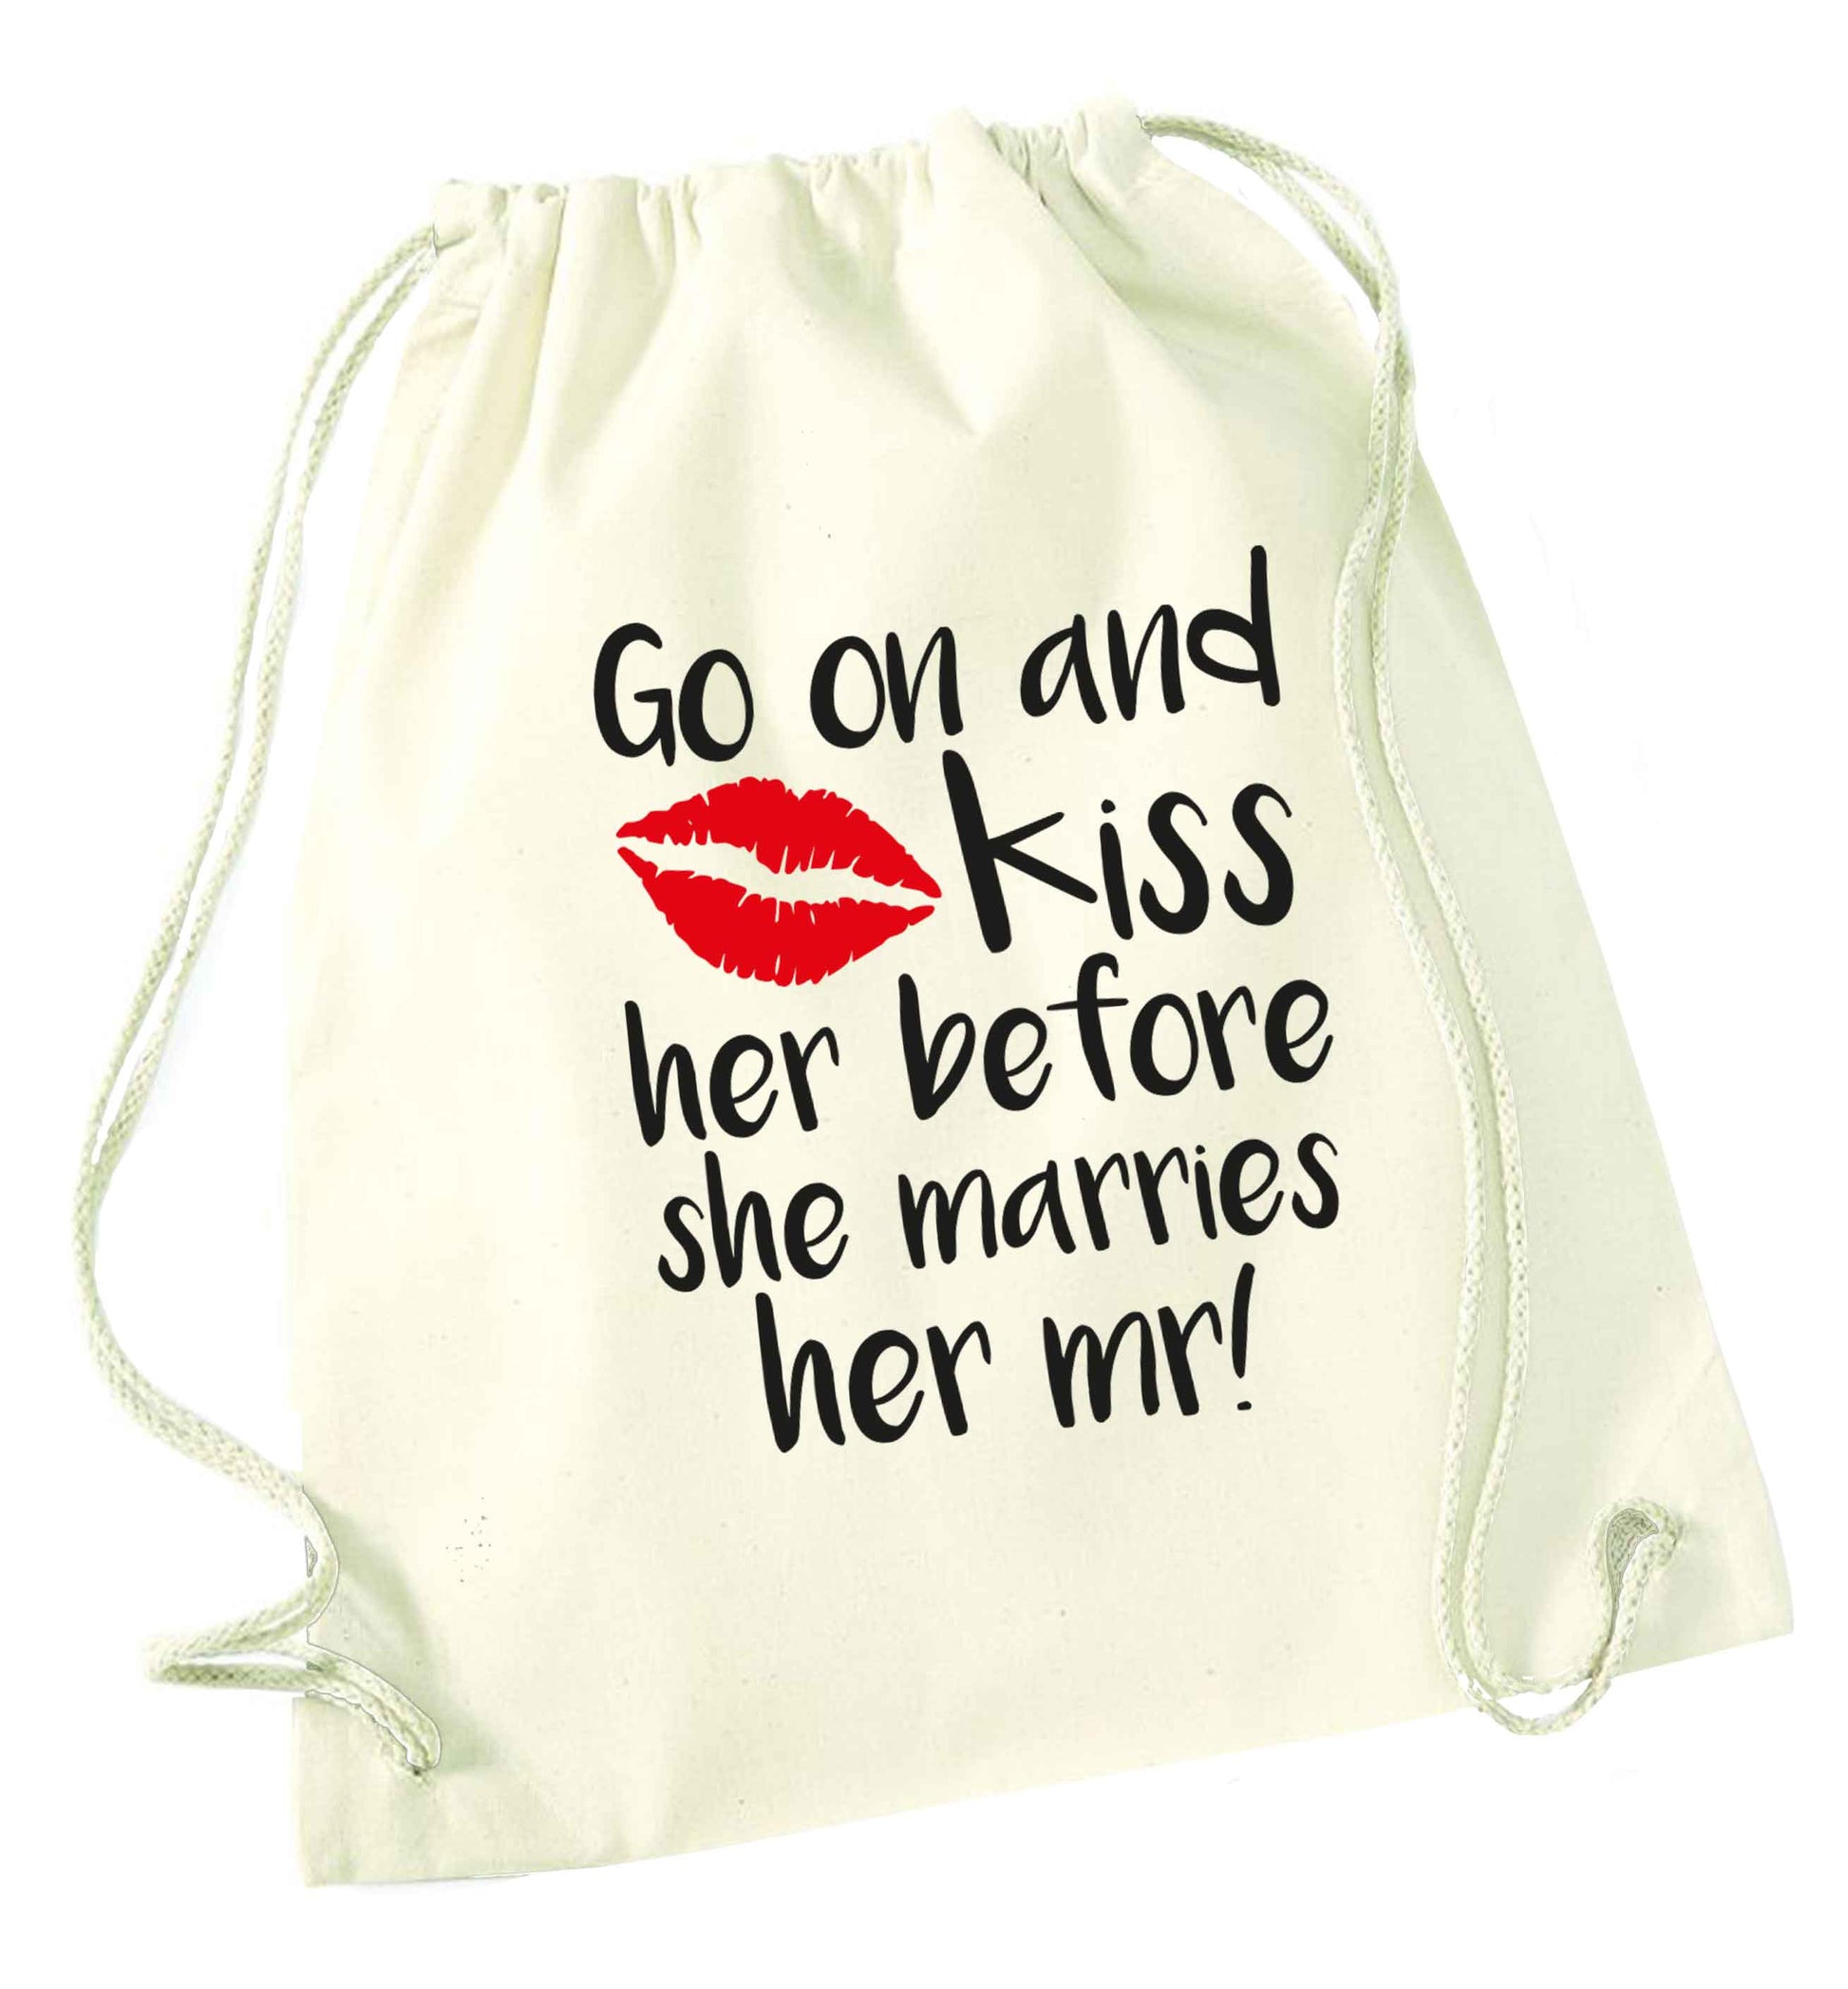 Kiss her before she marries her mr! natural drawstring bag